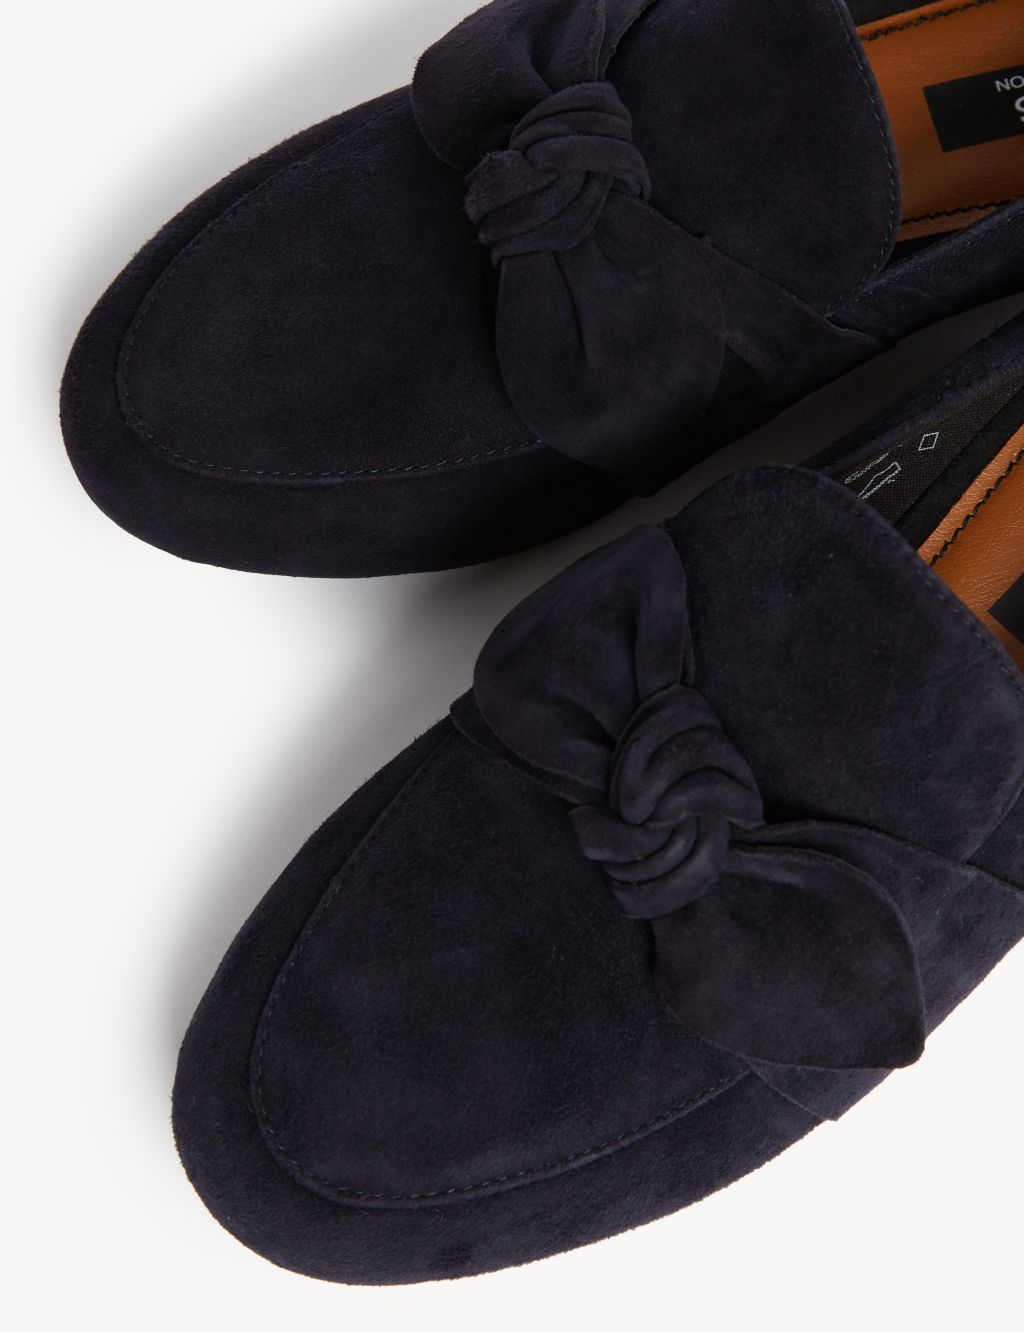 Wide Fit Suede Bow Flat Loafers image 3